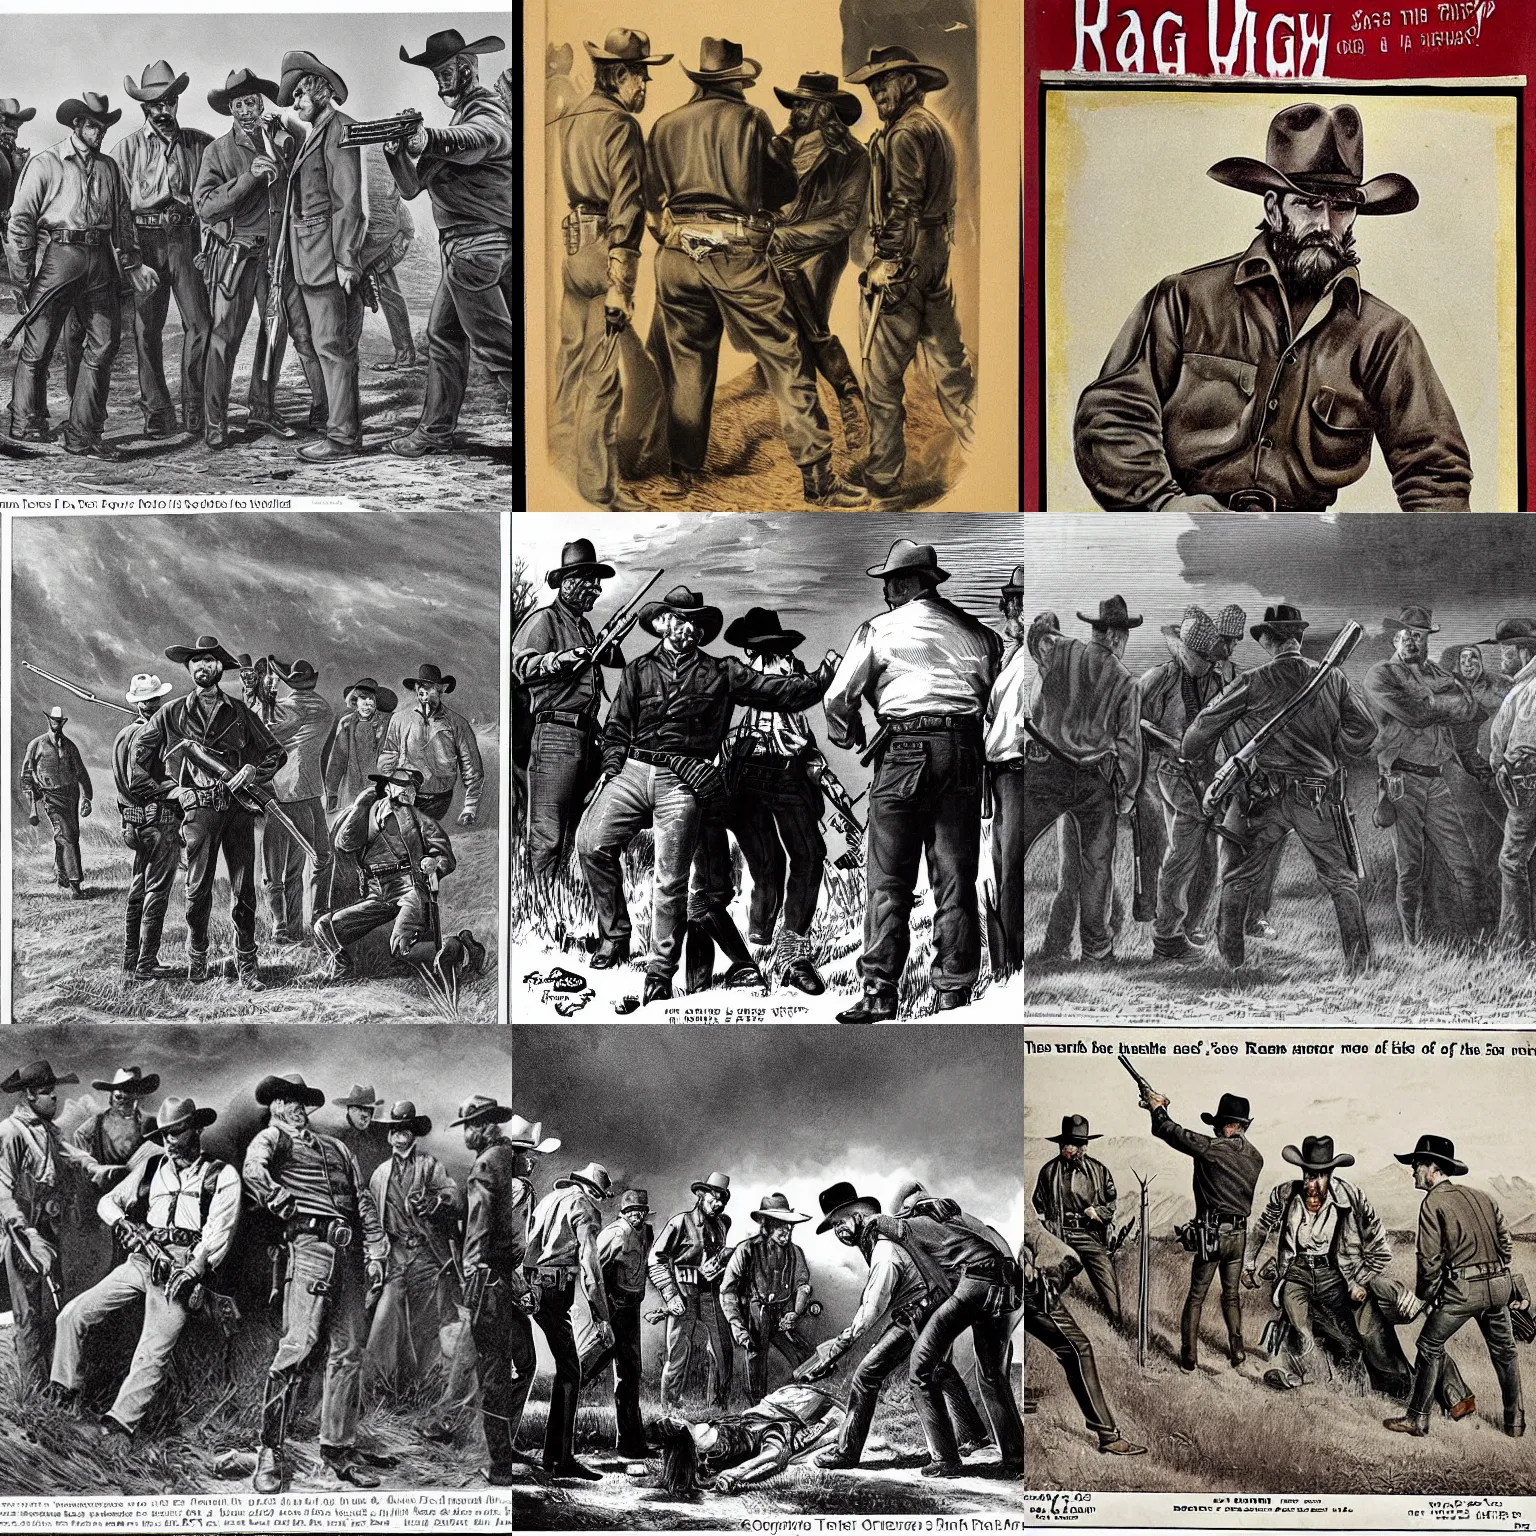 Prompt: there was forty feet between them. the swiftness of the ranger is still talked about today. texas red had not cleared leather fore a bullet fairly ripped, and the ranger's aim was deadly with the big iron on his hip. it was over in a moment and the folks had gathered round. there lay the body of the outlaw on the ground.